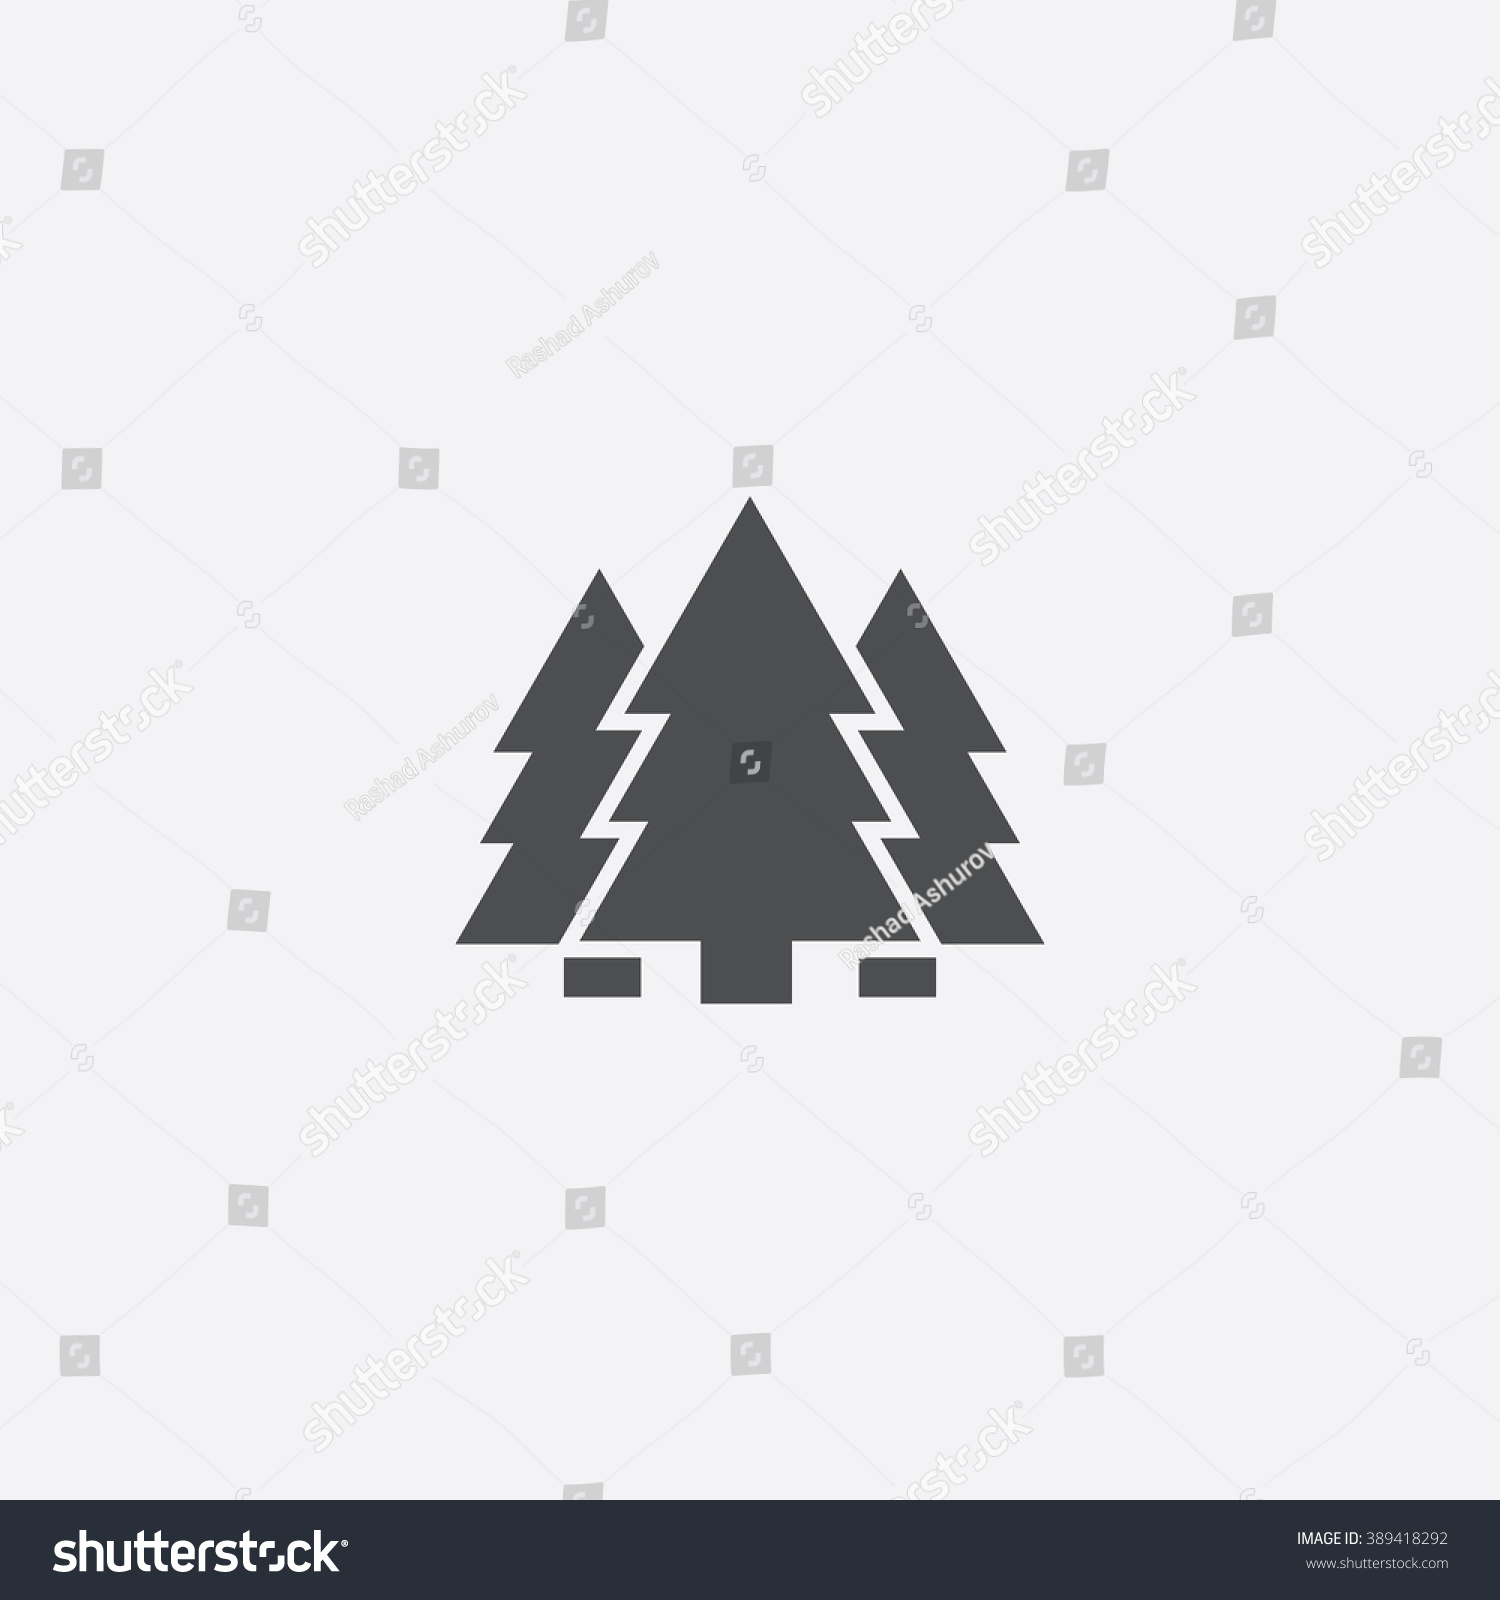 Forest Icon Stock Vector 389418292 - Shutterstock